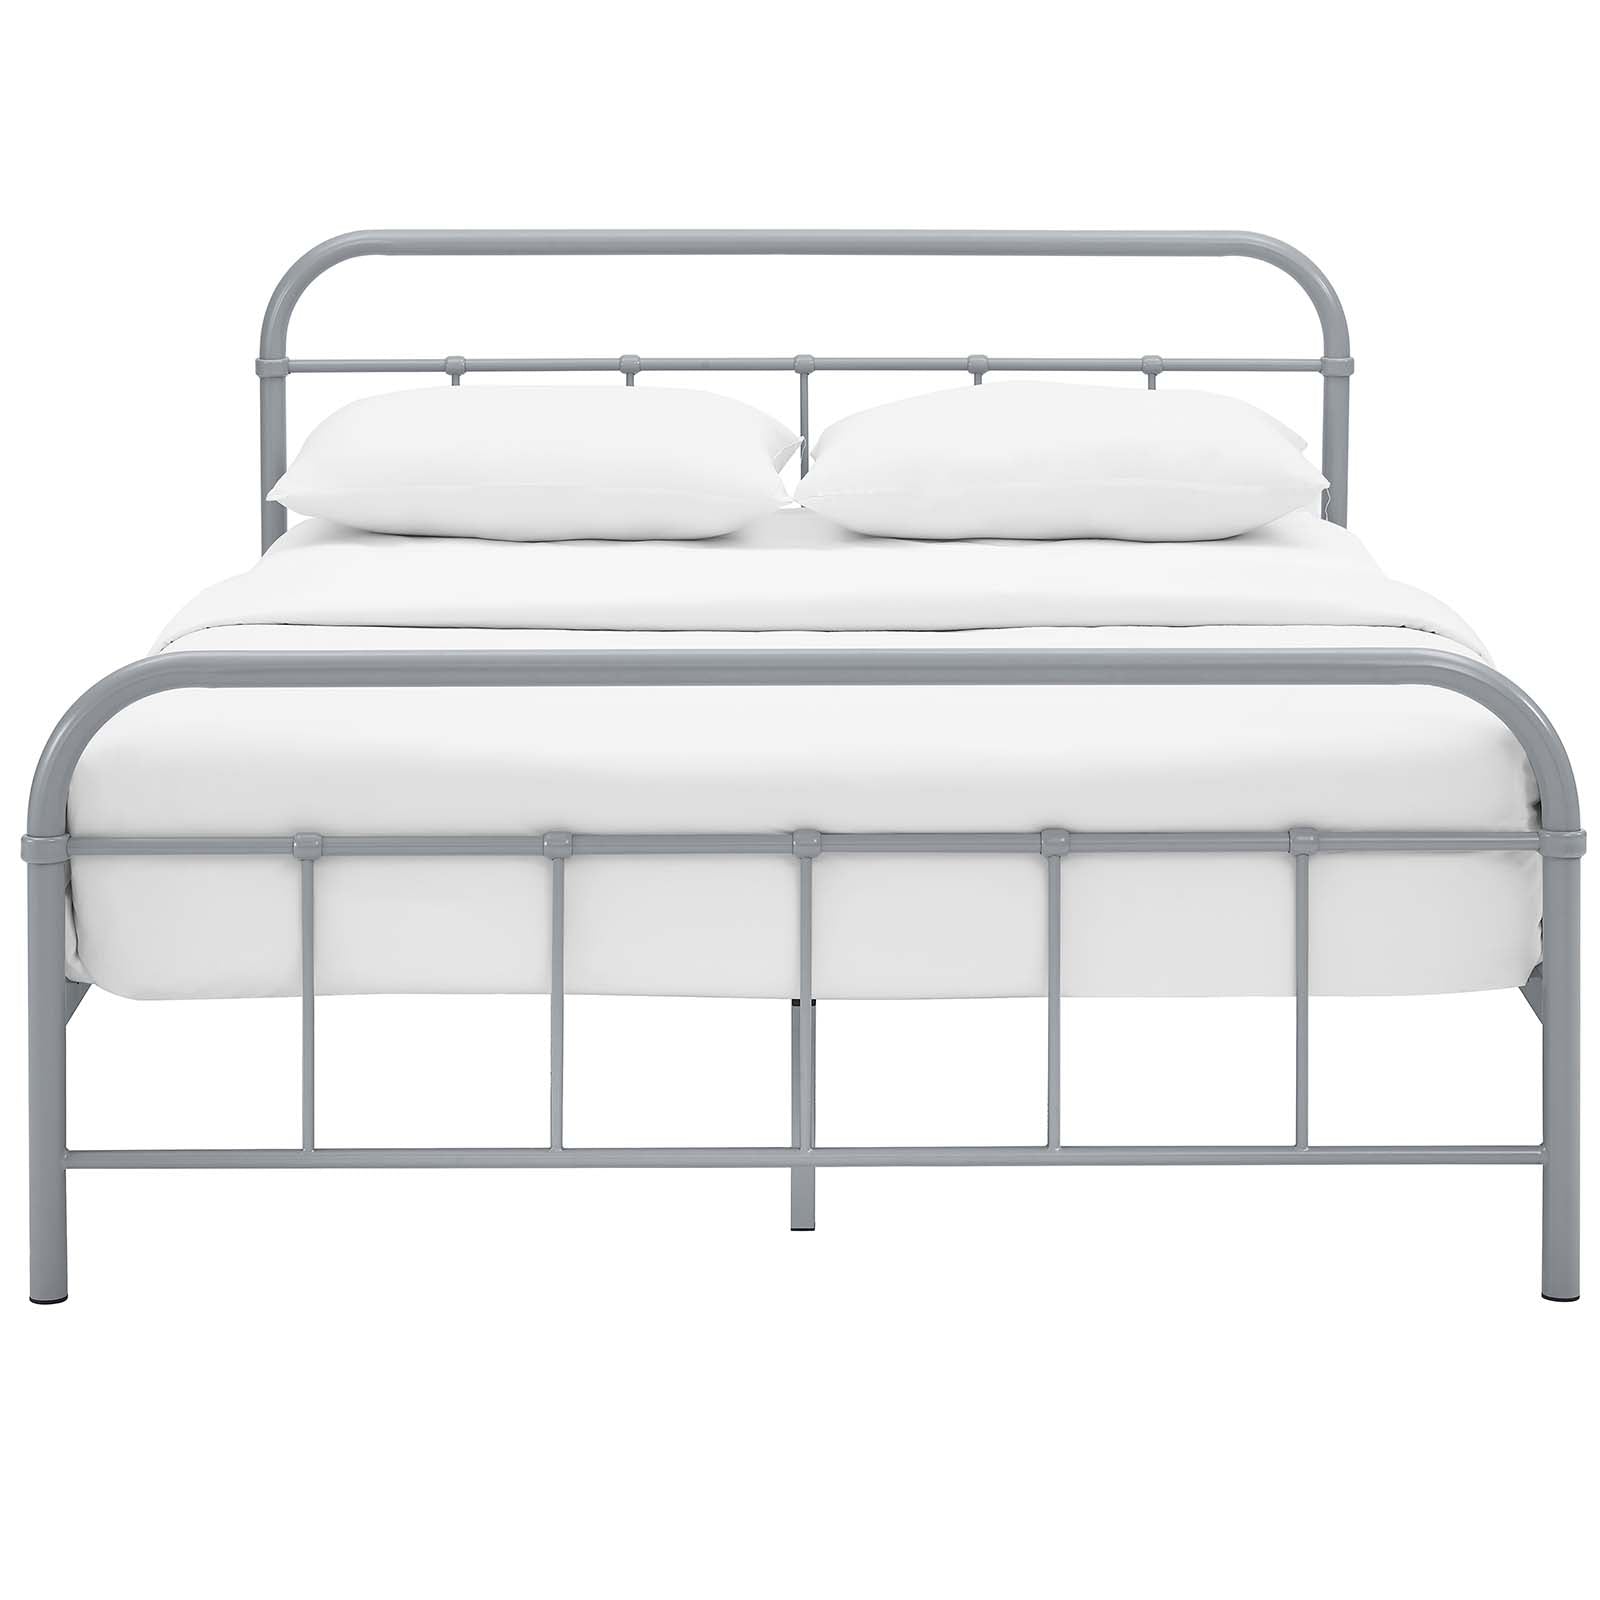 Modway Beds - Maisie Queen Stainless Steel Bed Frame Gray